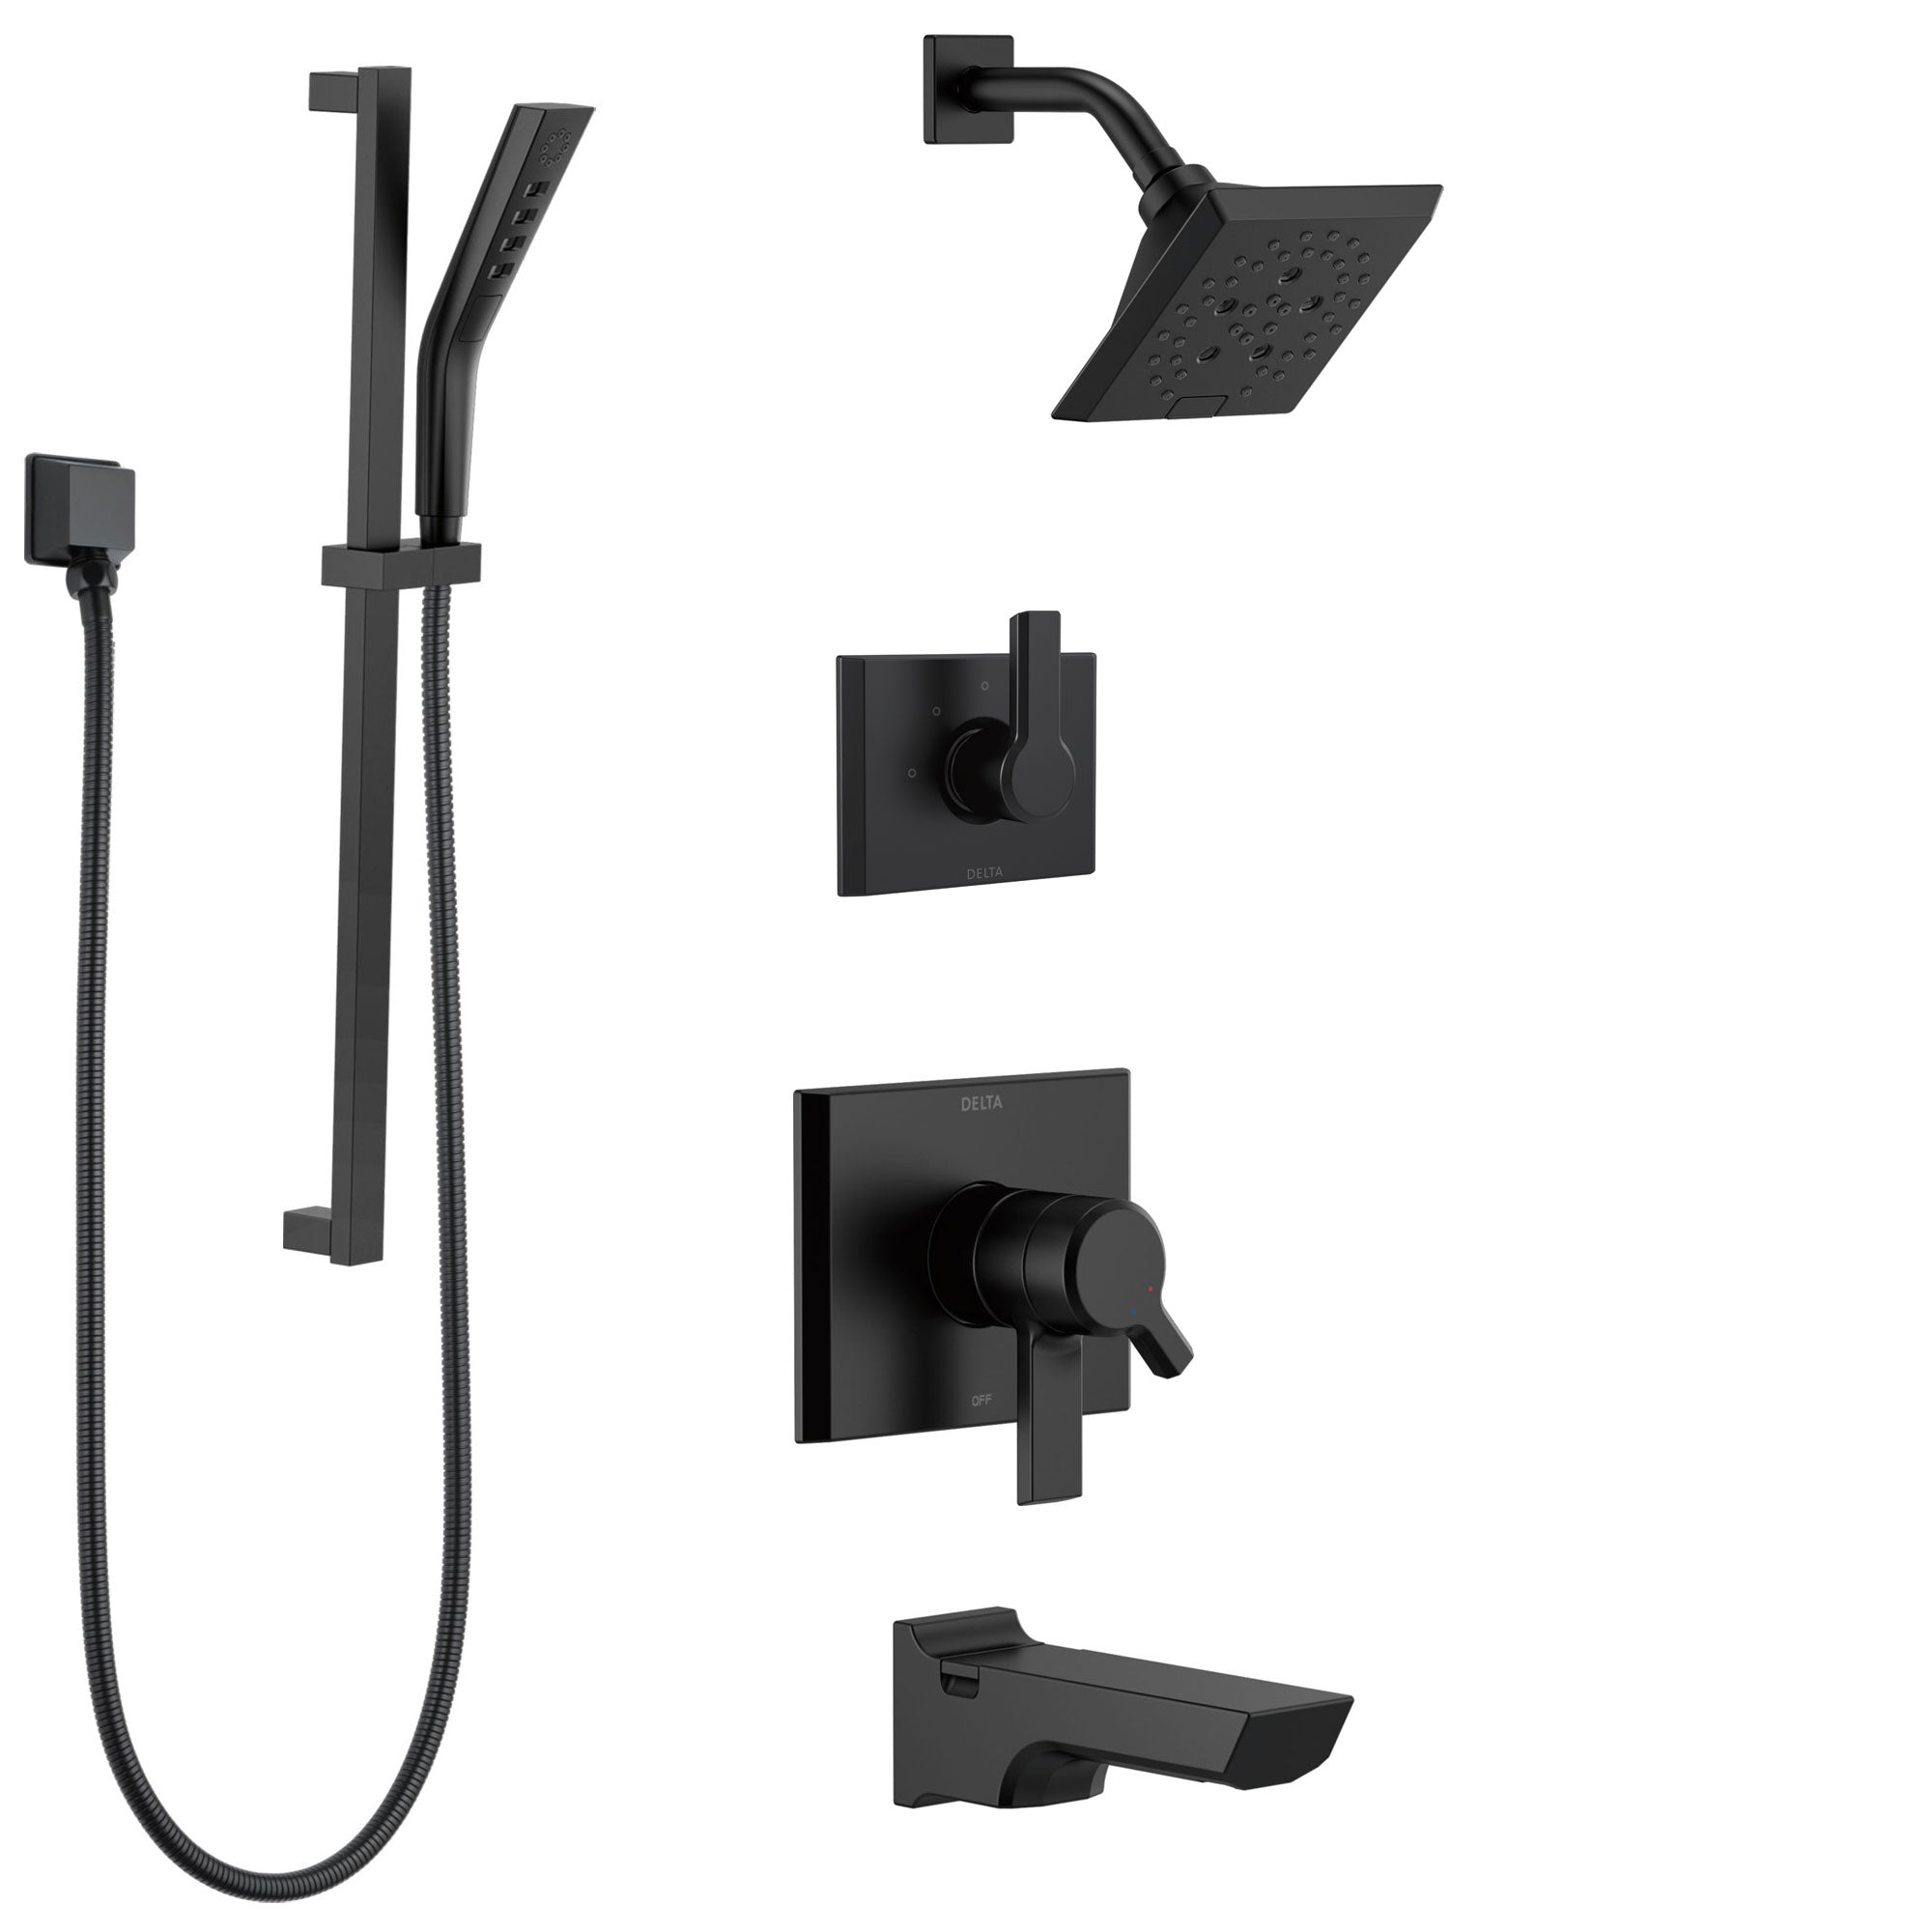 Delta Pivotal Matte Black Finish Modern Angular 17 Series Tub and Shower System with Hand Shower on Slide Bar and Multi-Setting Showerhead SS174993BL2